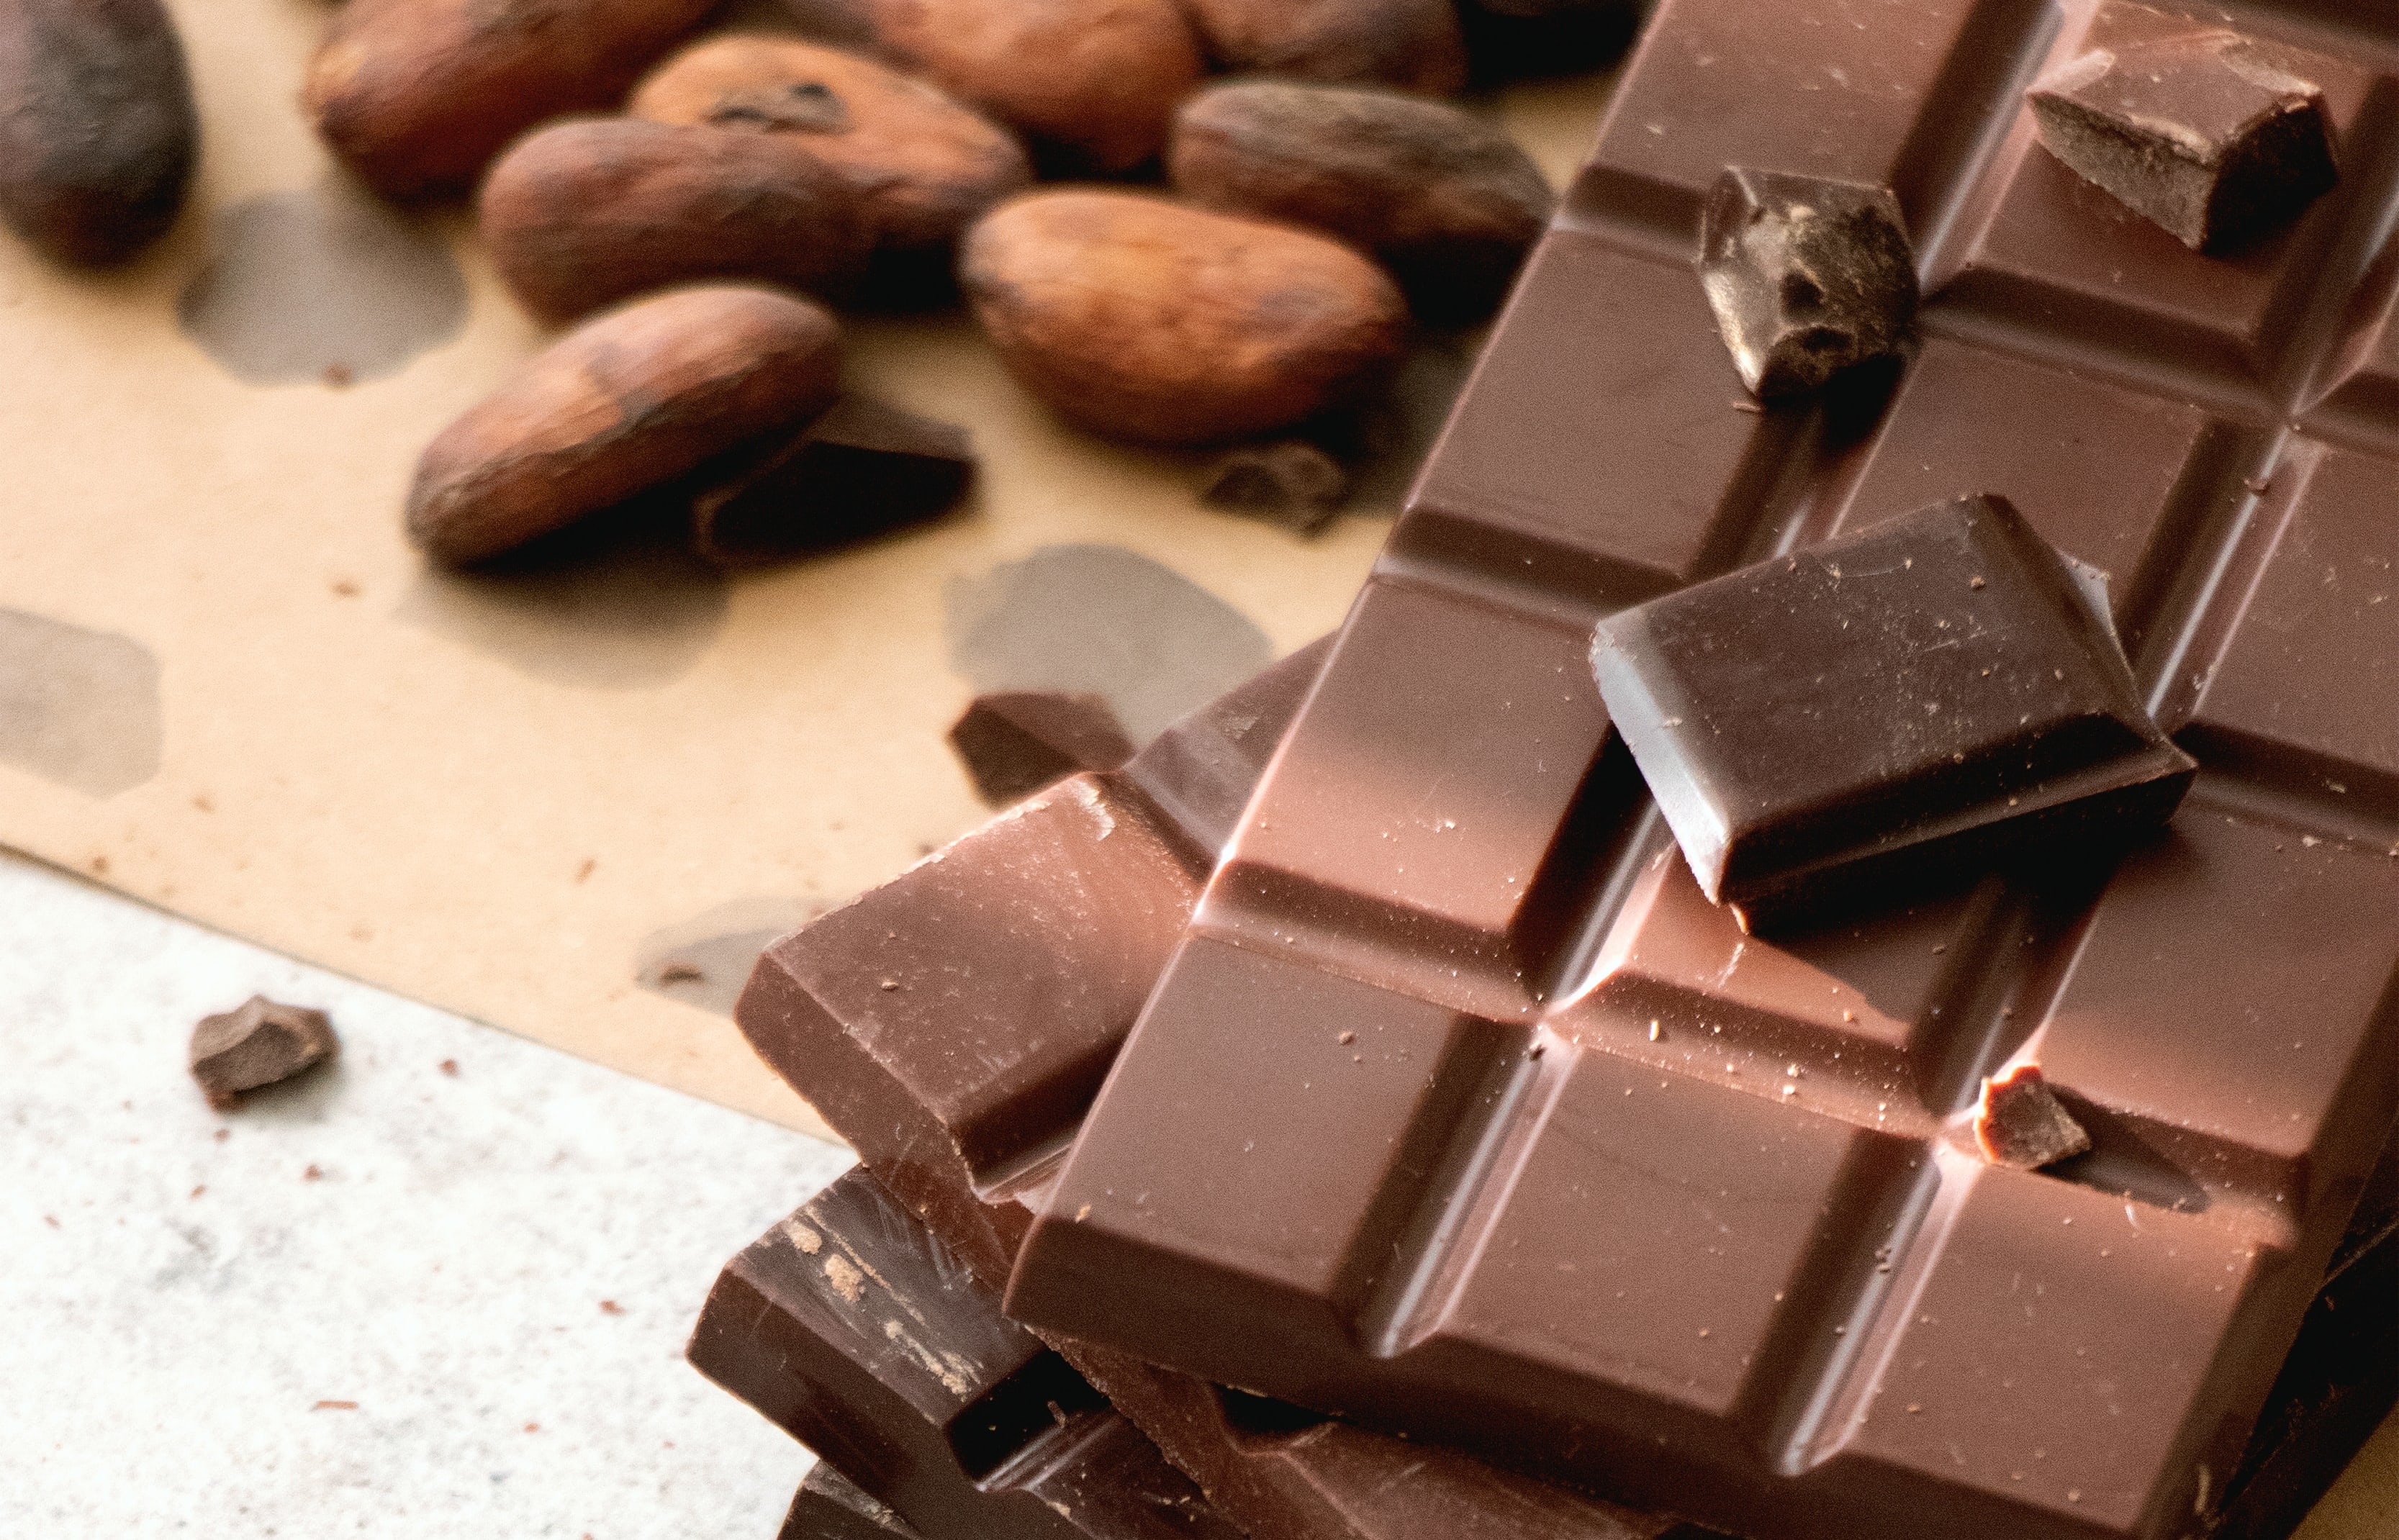 Chocolate and cocoa beans